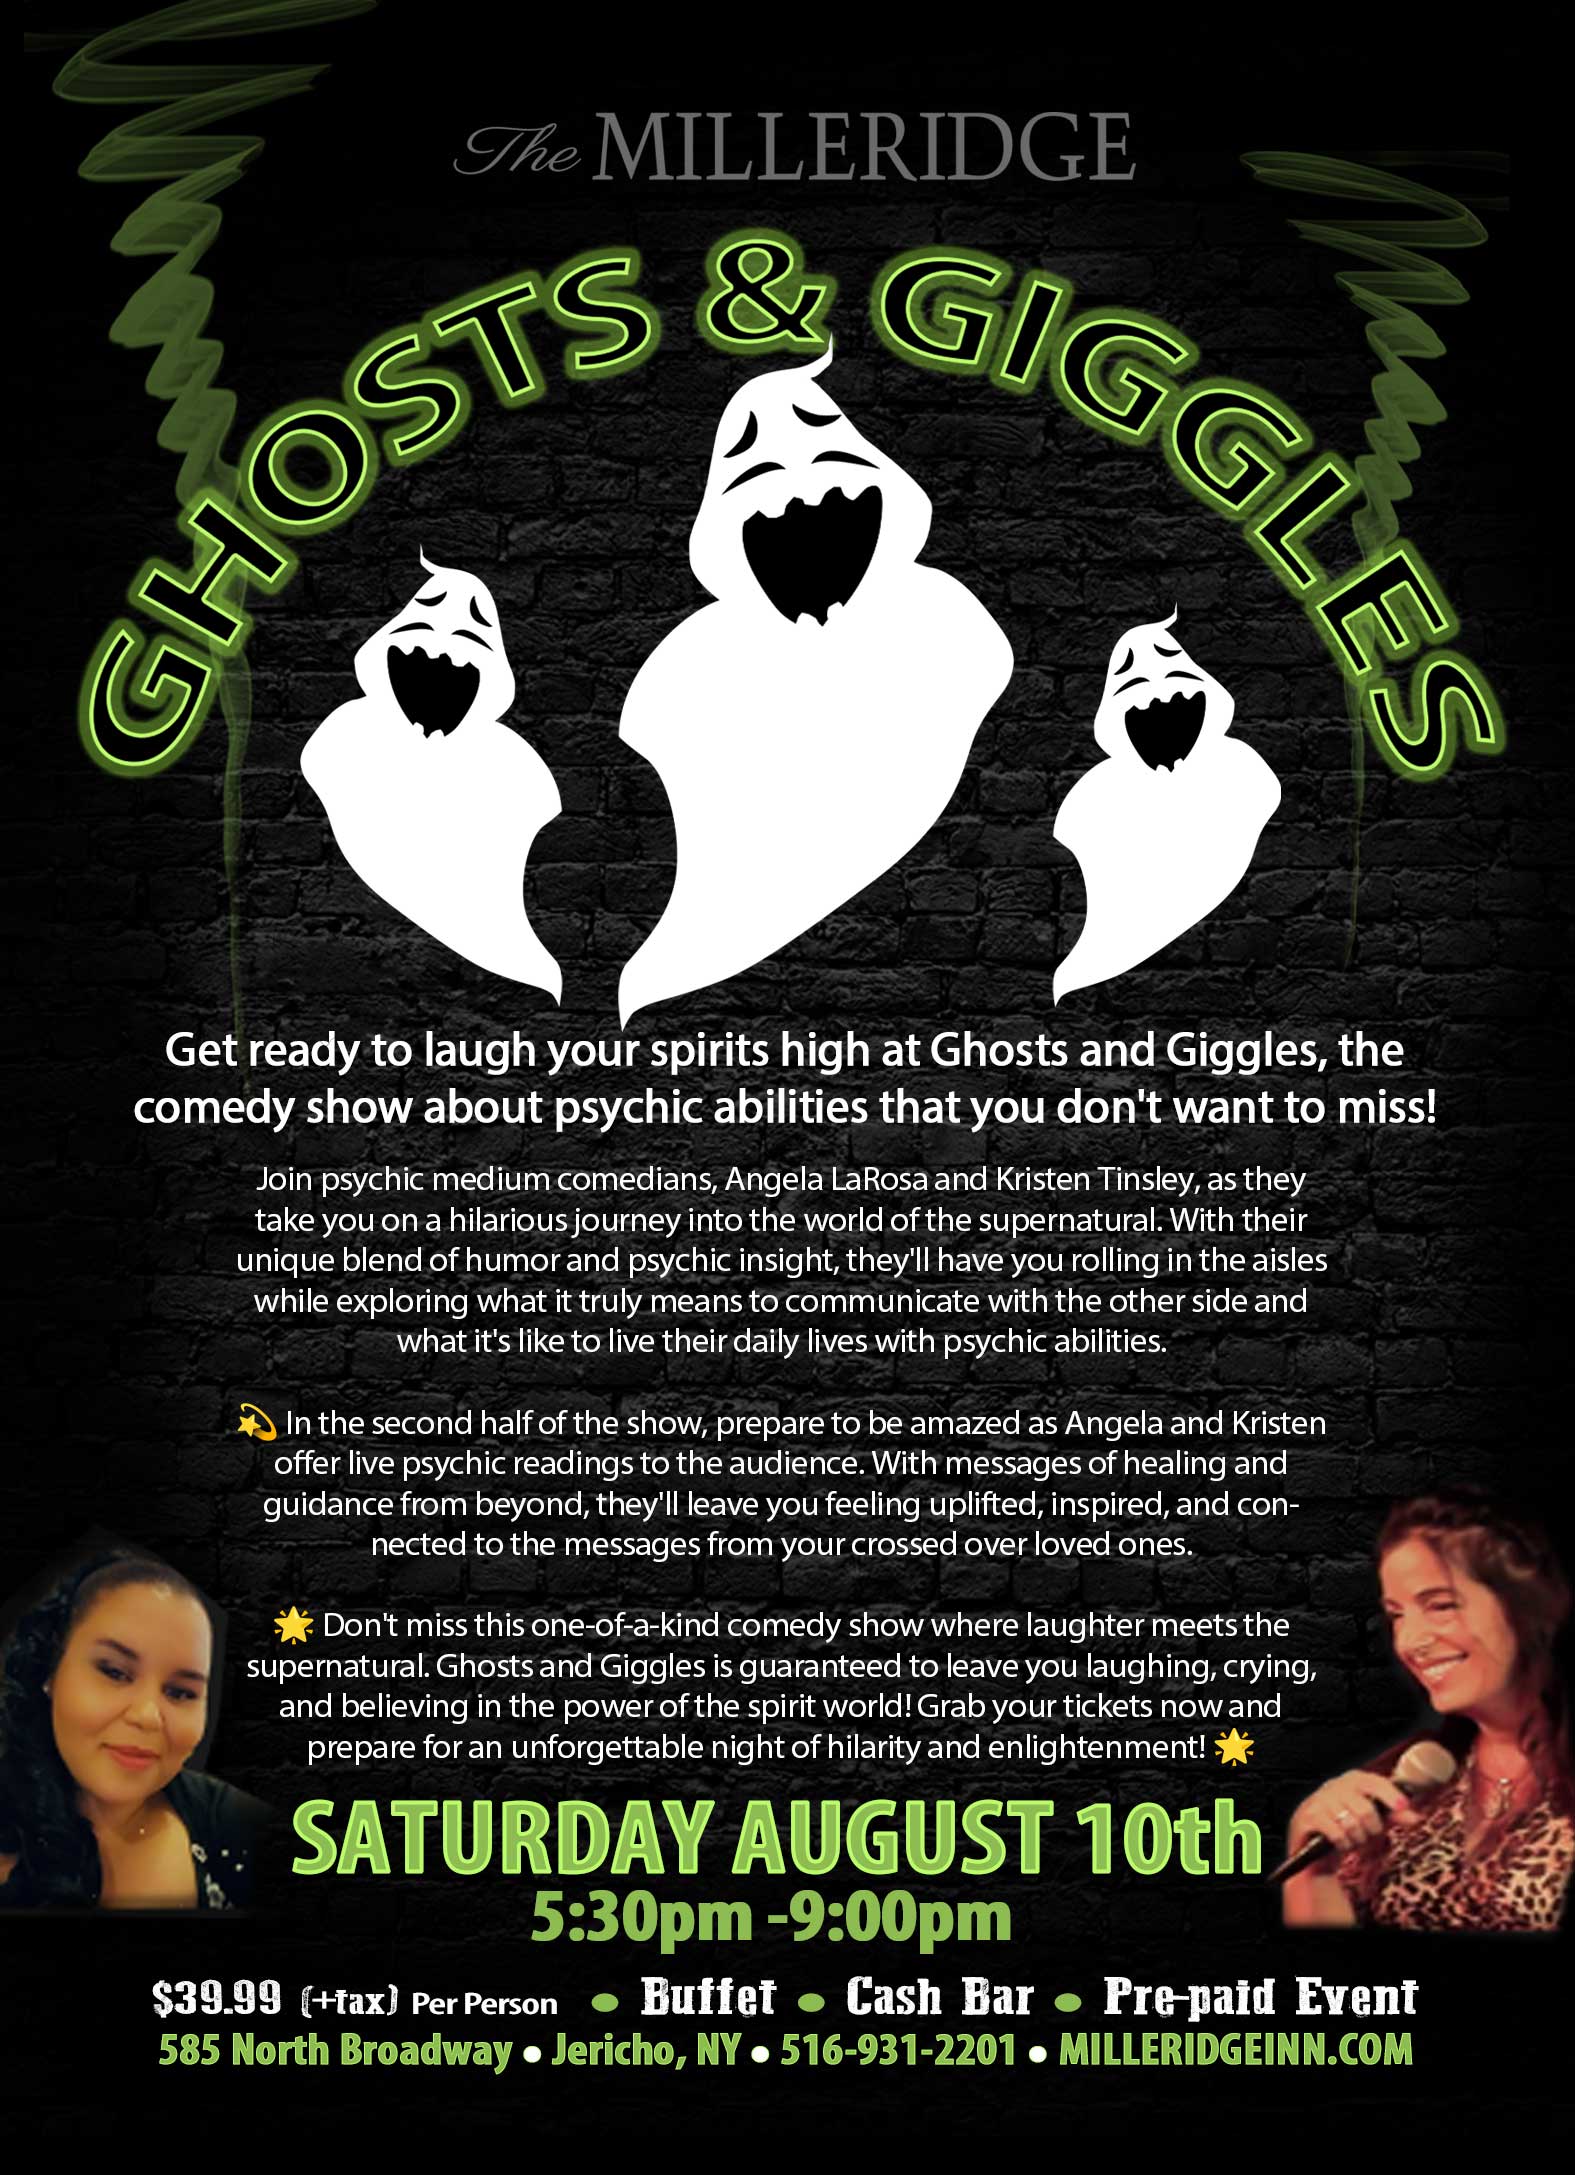 Ghosts and Giggles at the Milleridge